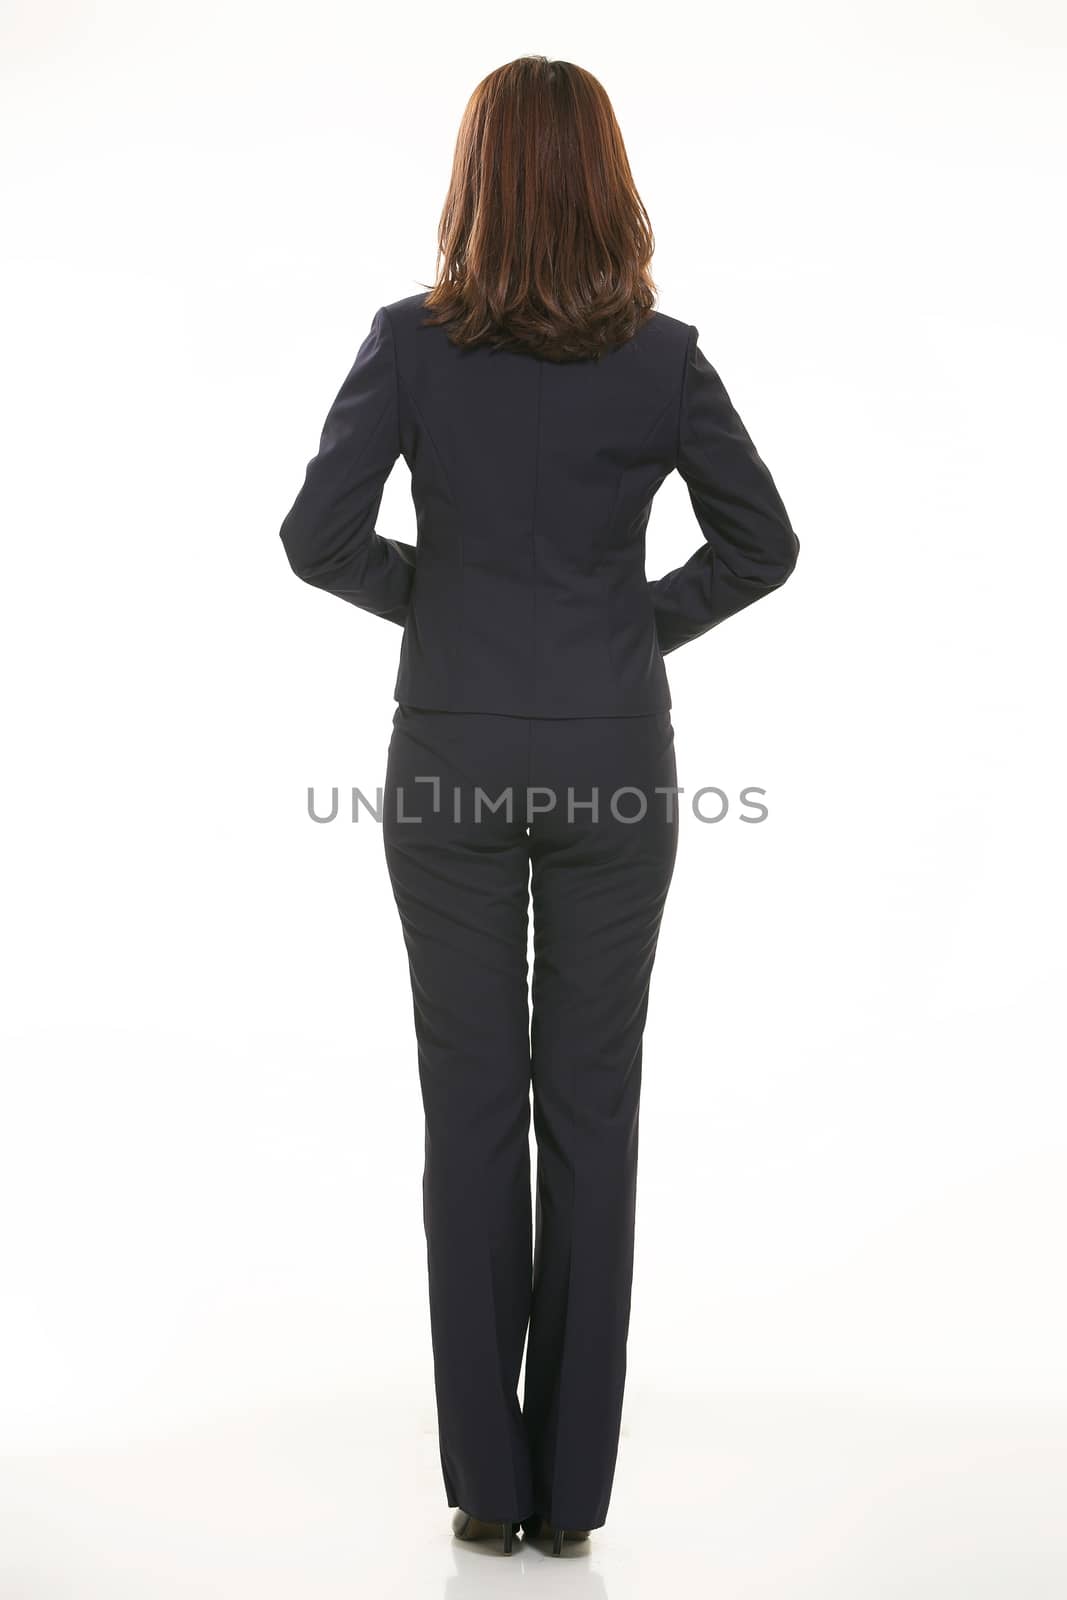 Young Asian women wearing a suit in front of a white background by quweichang